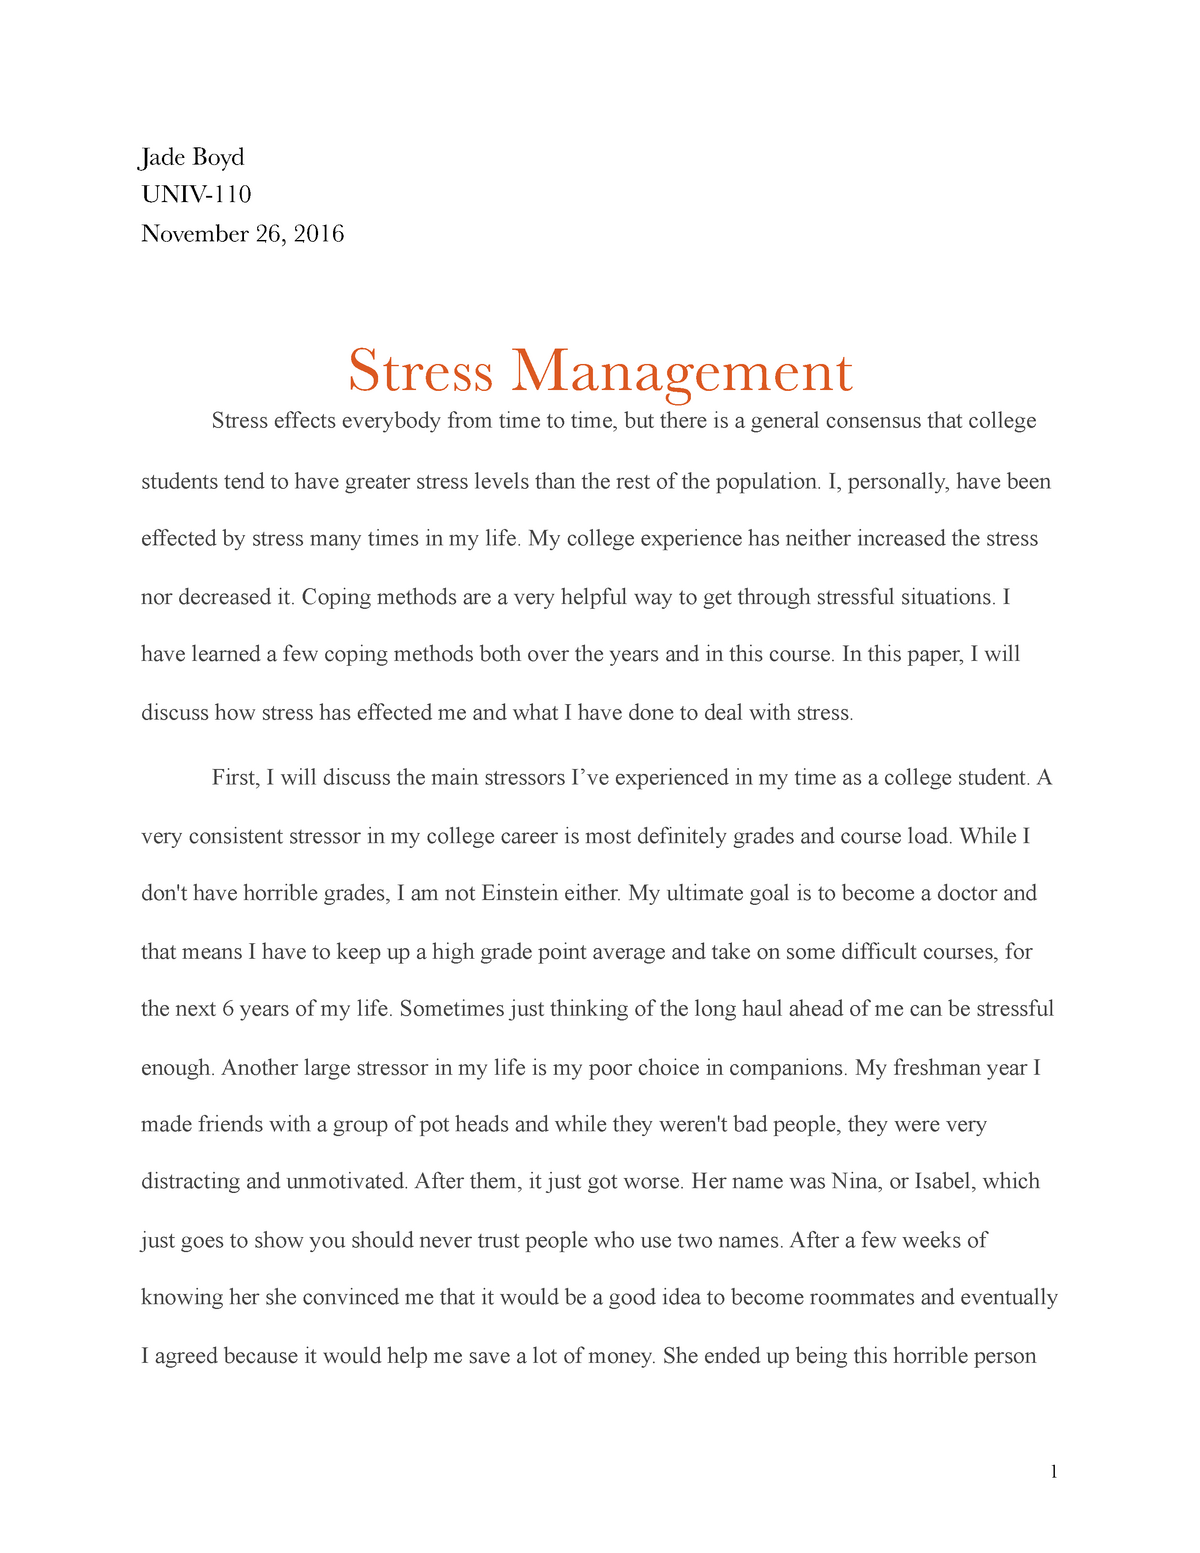 essay about stress at work